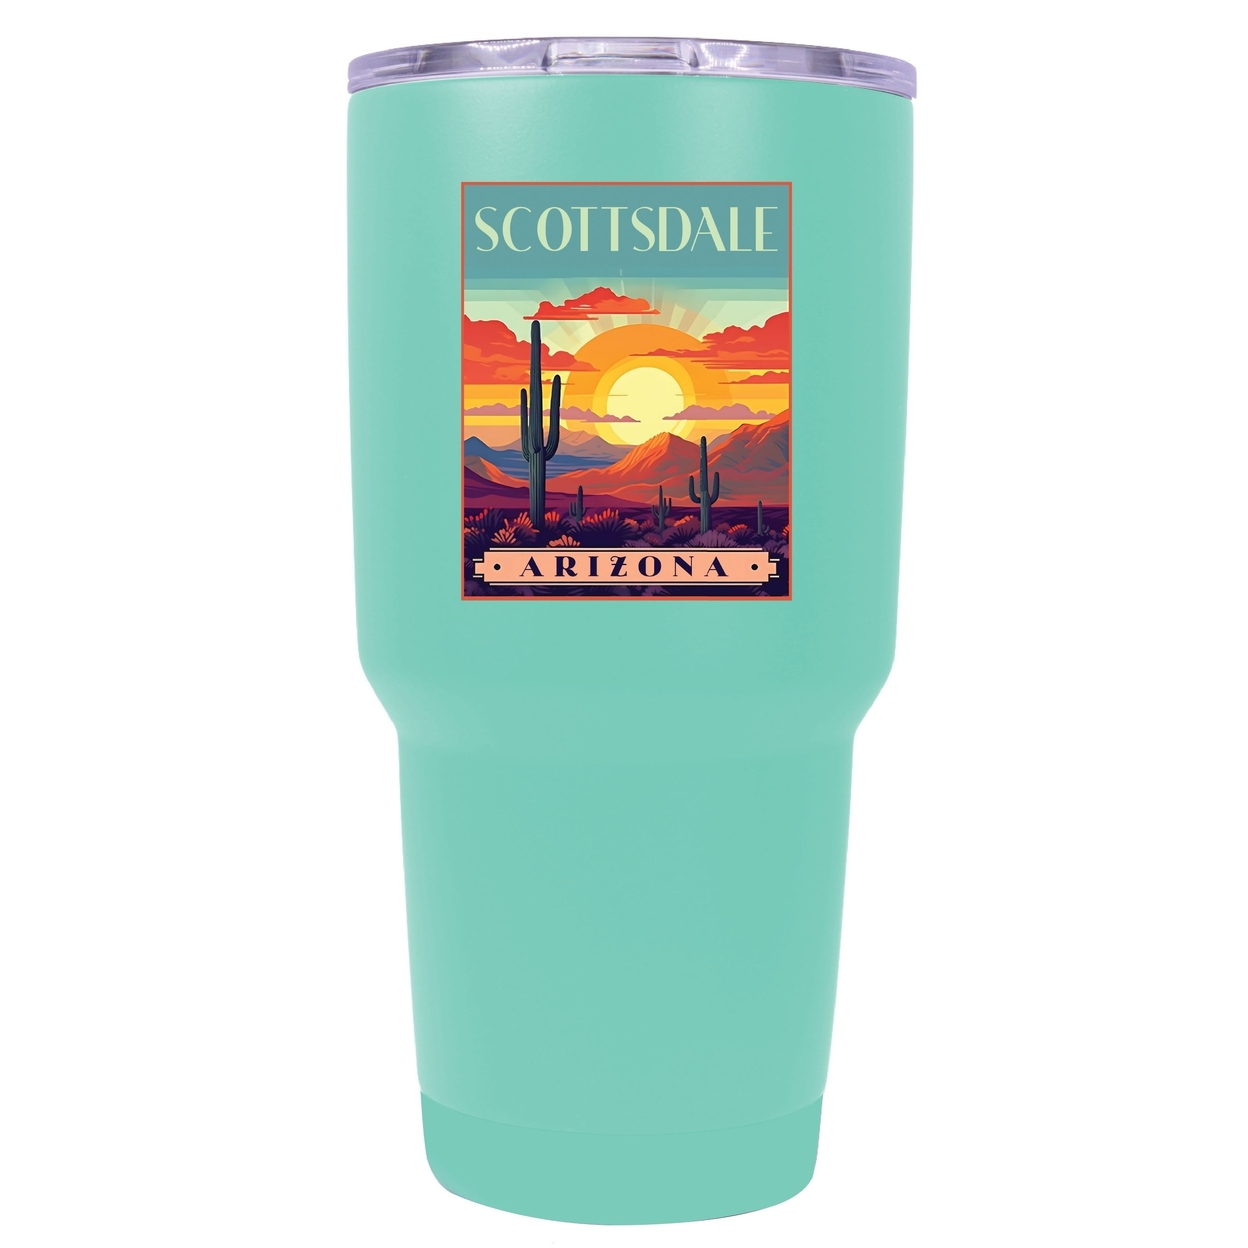 University Of Louisiana Monroe 24 Oz Laser Engraved Stainless Steel Insulated Tumbler - Choose Your Color. - Seafoam,,Single